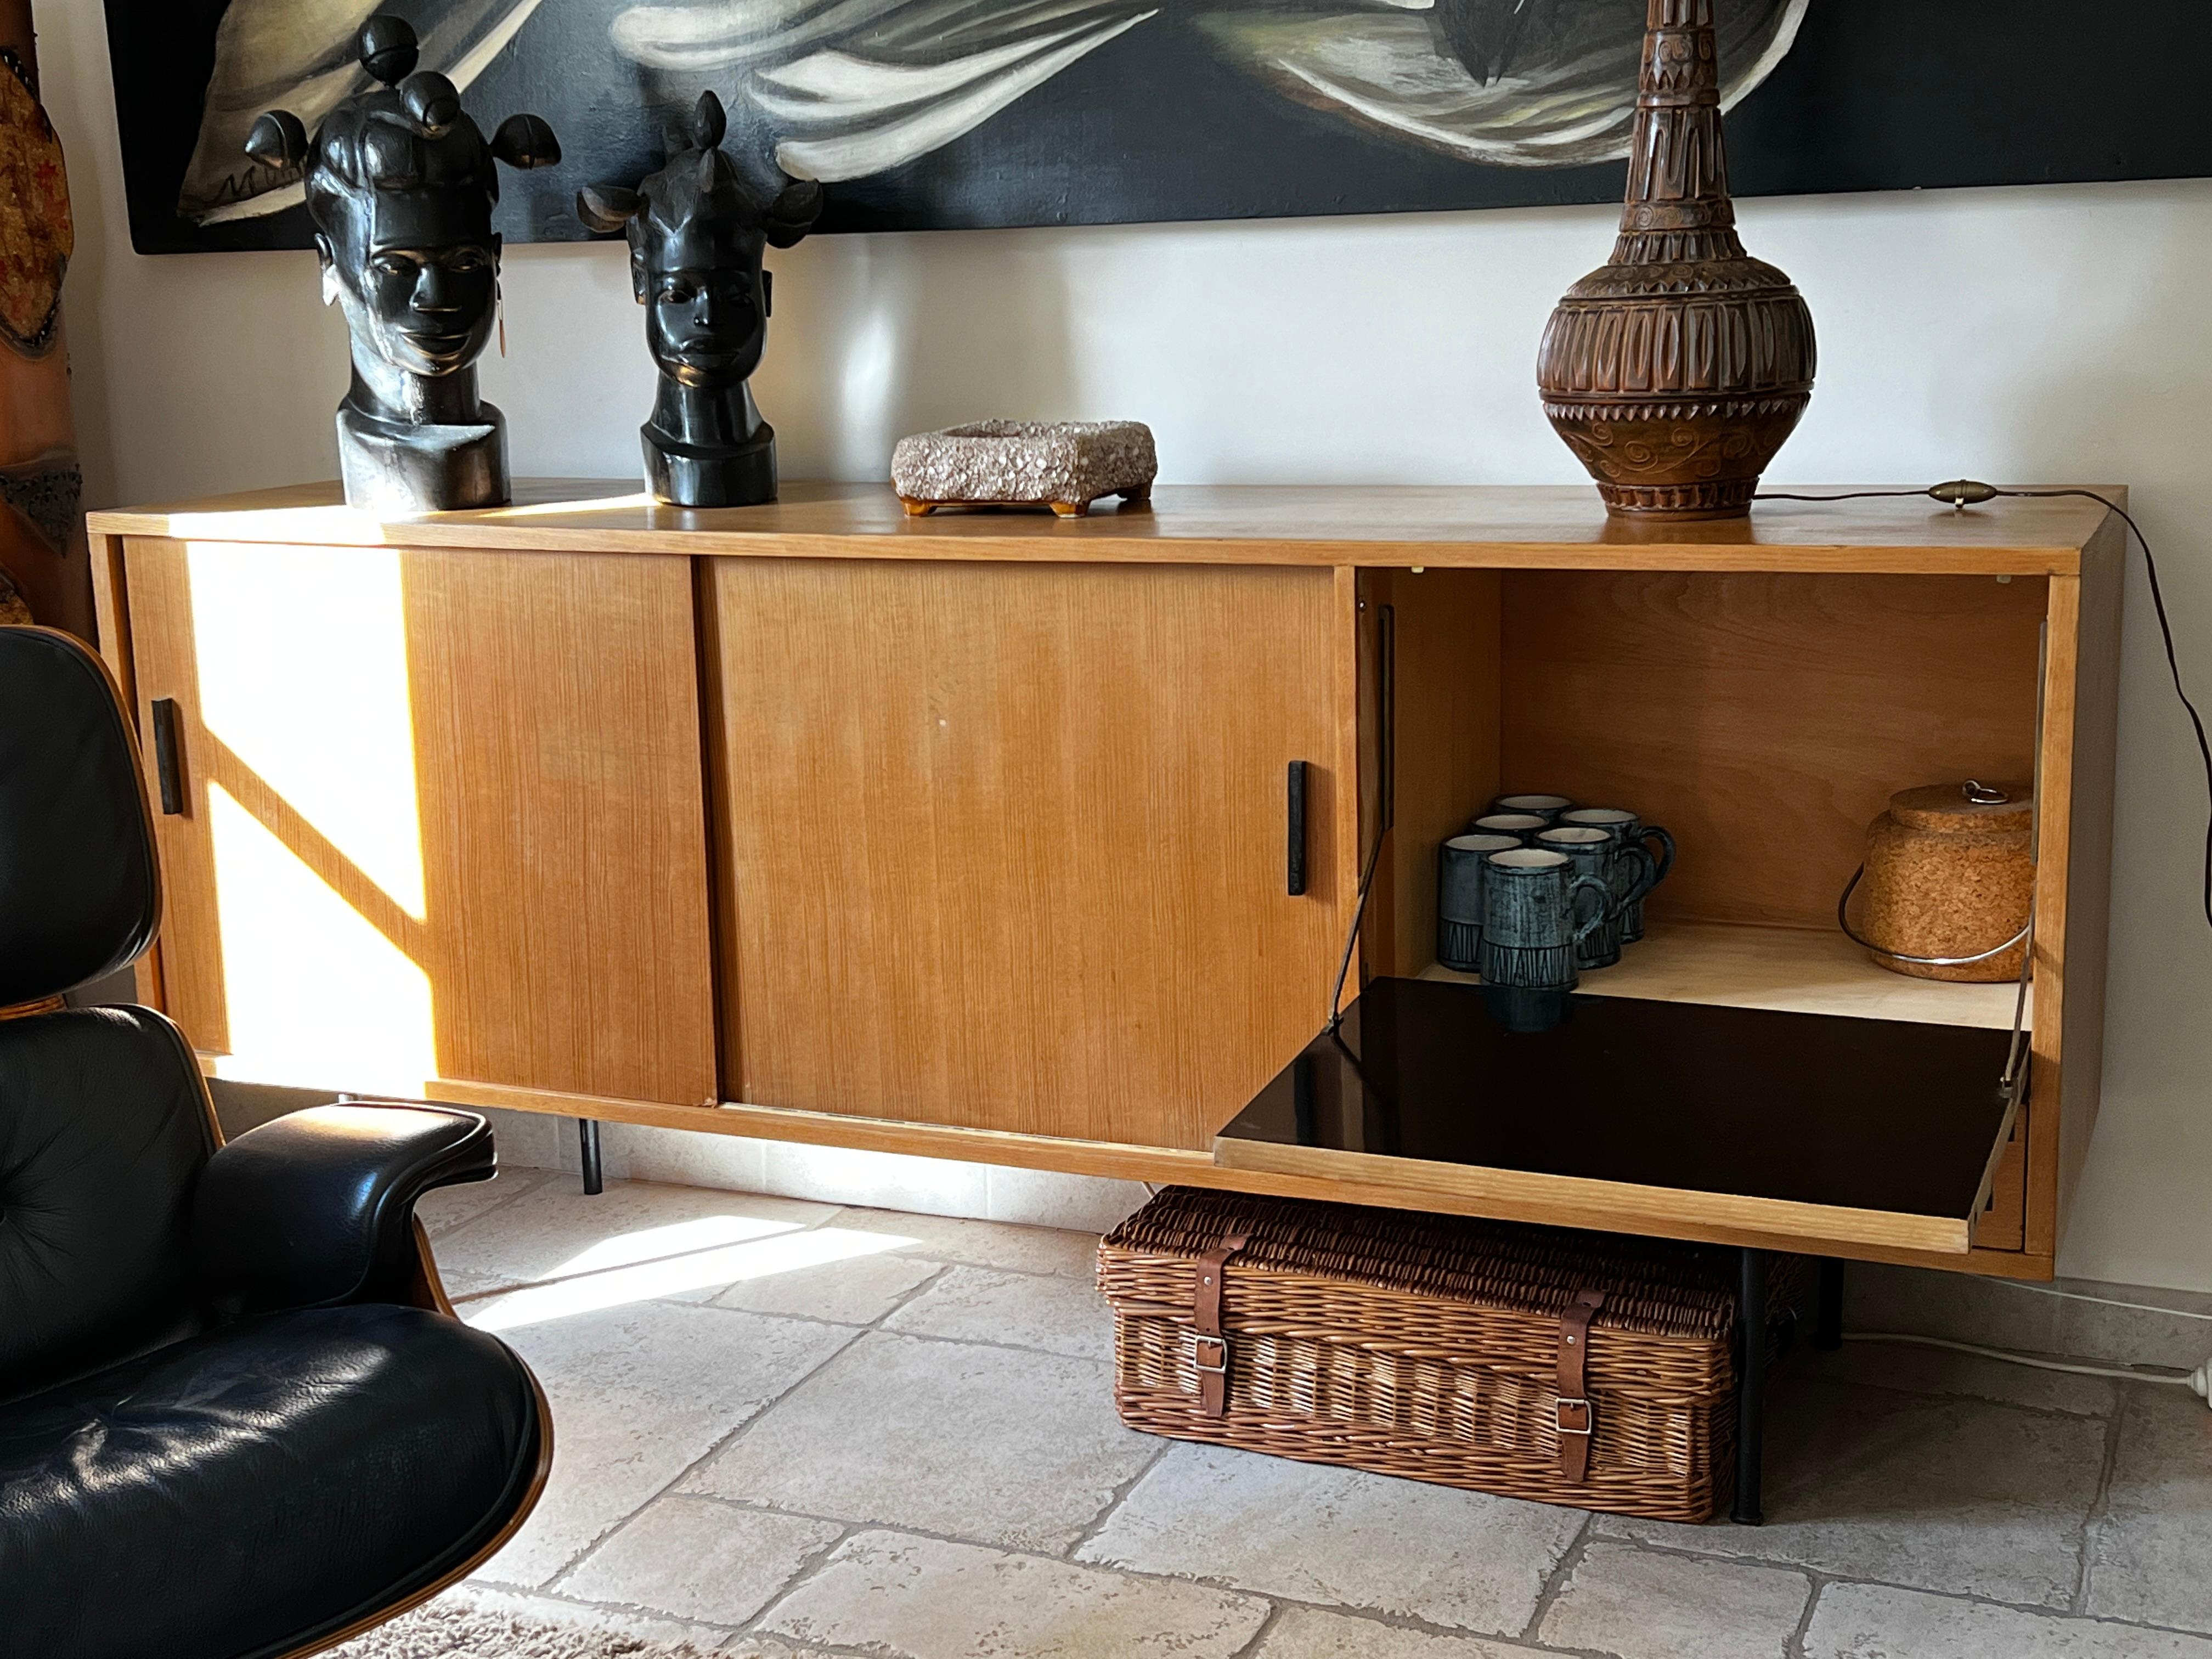 Sideboard by Gérard Guermonprez circa 1950, produced by Magnani. Structure in ash veneer opens with two sliding doors and a flap and 1 drawer on the right.